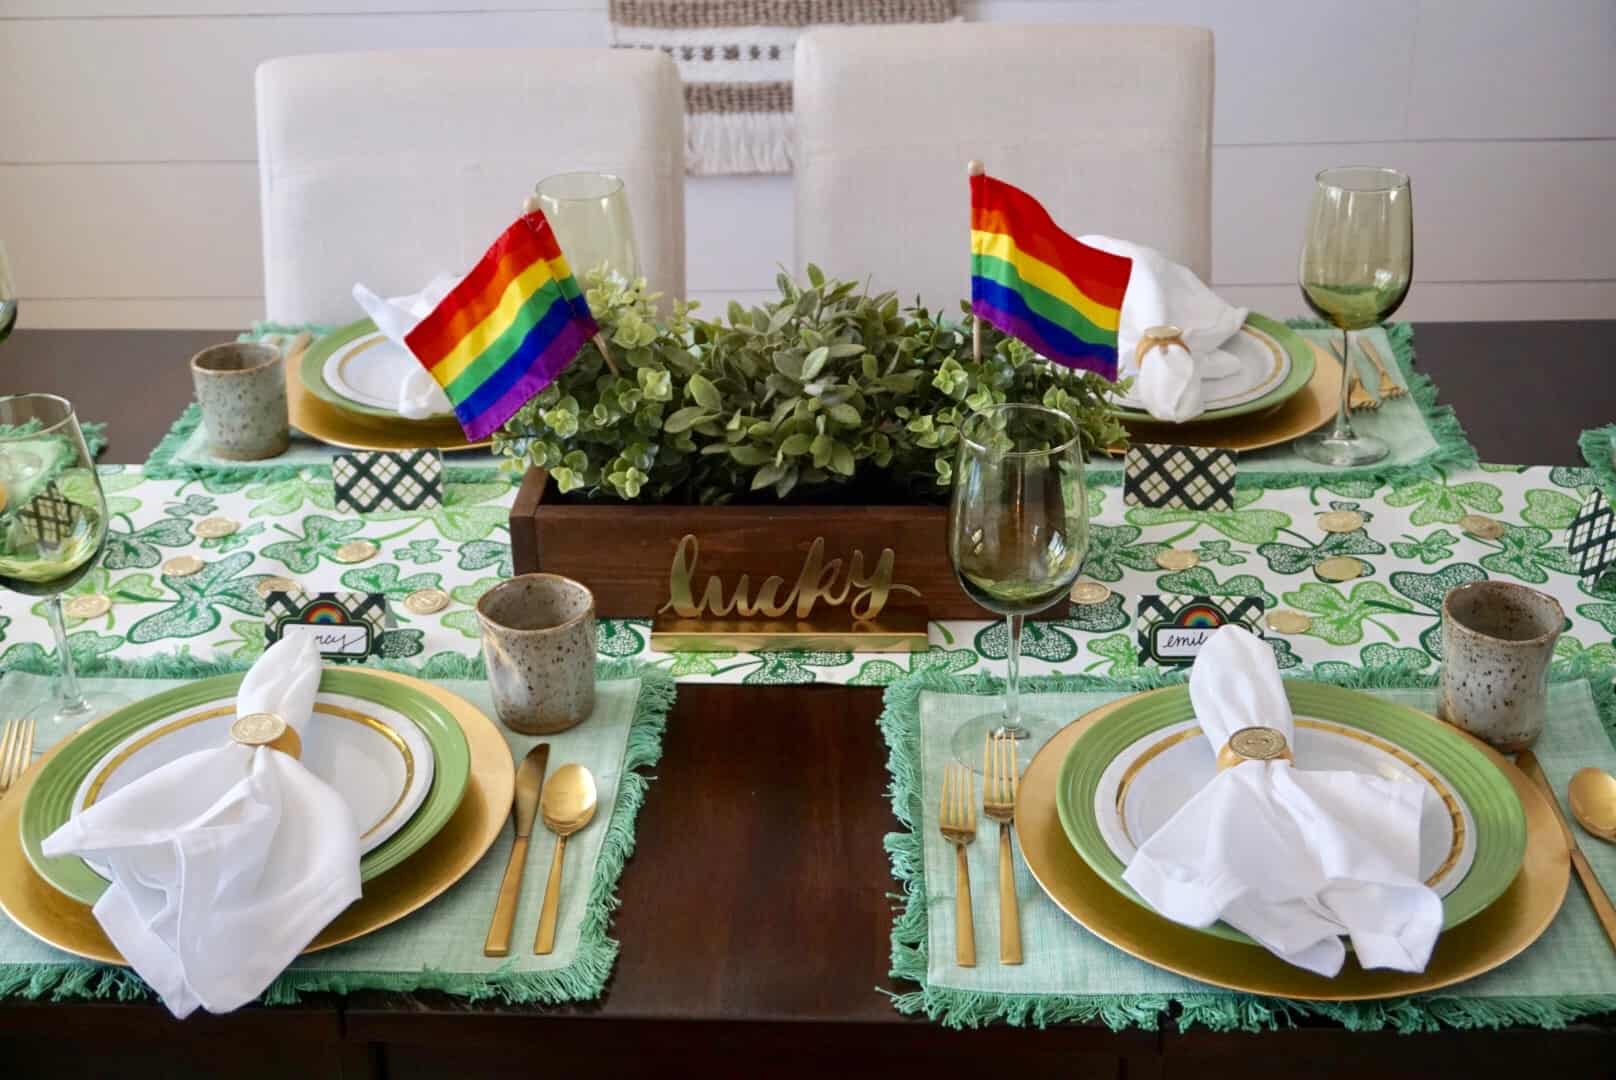 St. Patrick's Day Home Decor Swap party table